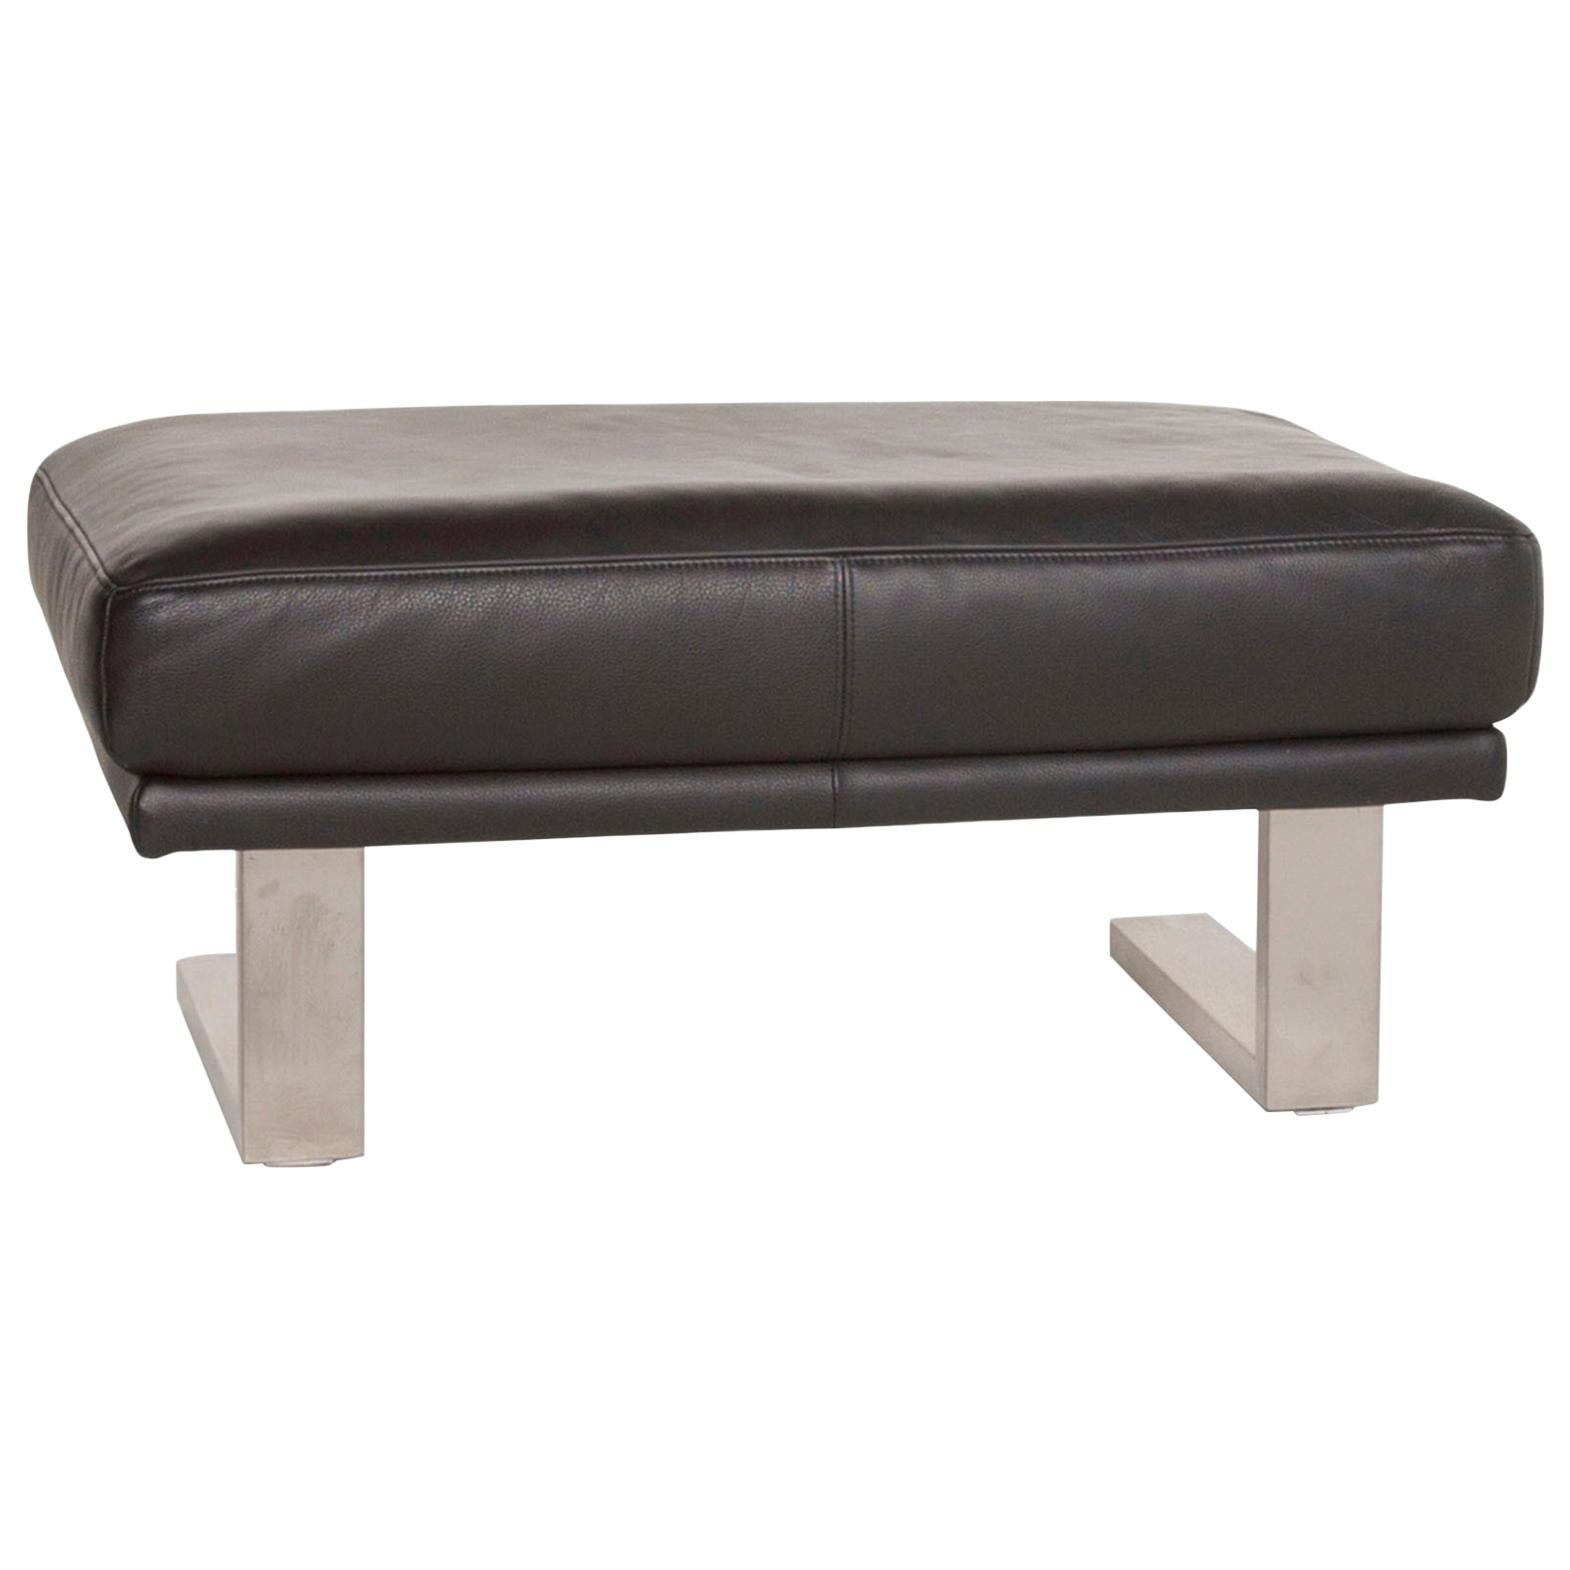 Rolf Benz 6600 Leather Stool Black